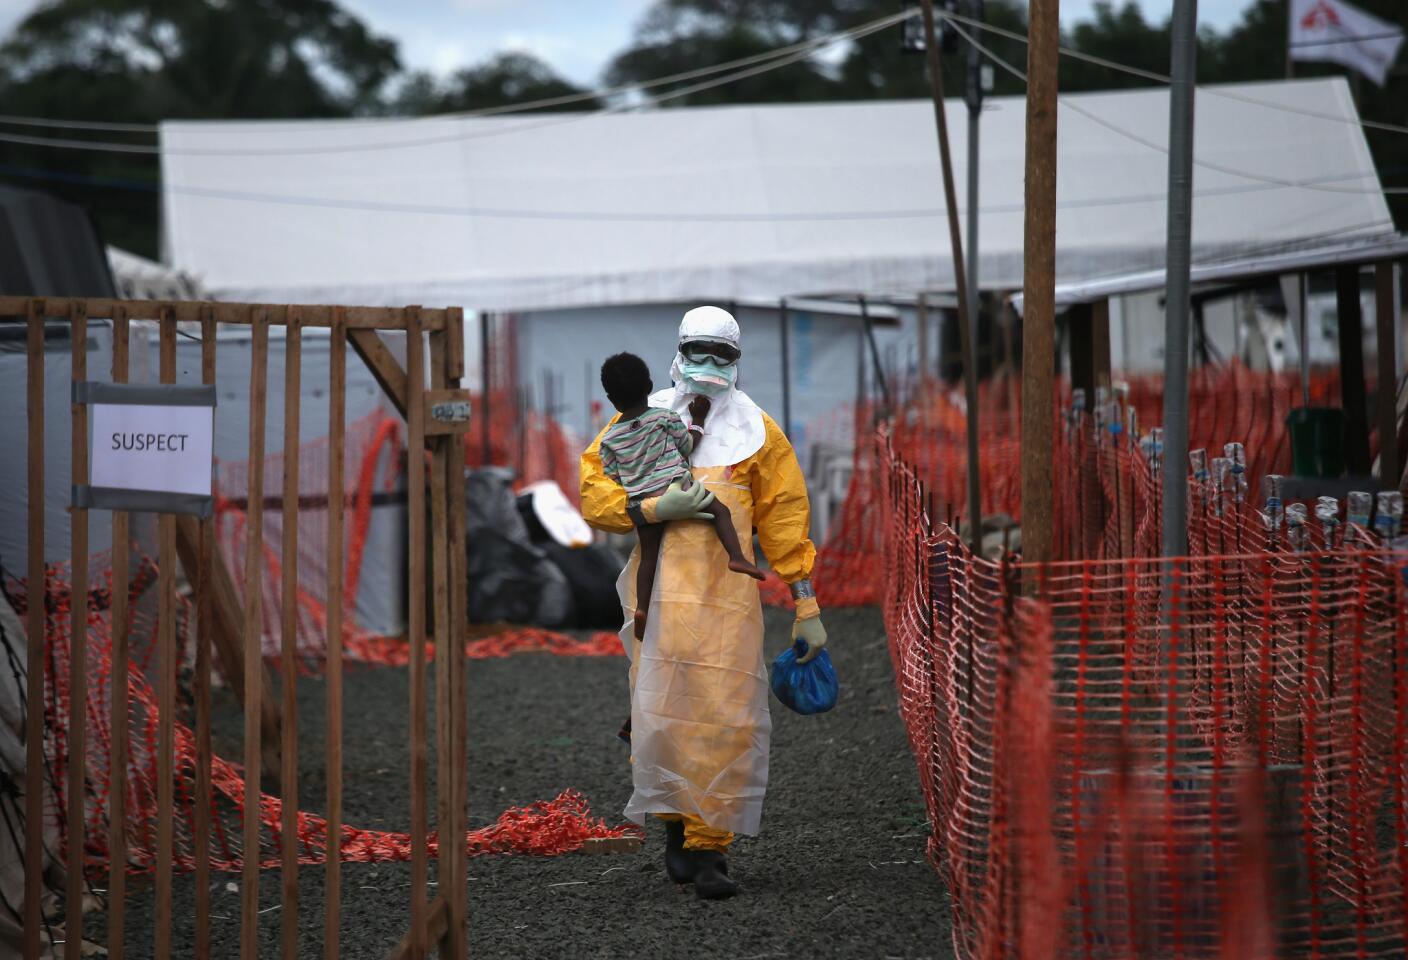 A Doctors Without Borders health worker in protective clothing carries a child suspected of having Ebola at a treatment center in Paynesville, Liberia. The girl and her mother, showing symptoms of the deadly disease, were awaiting test results on Oct. 5.